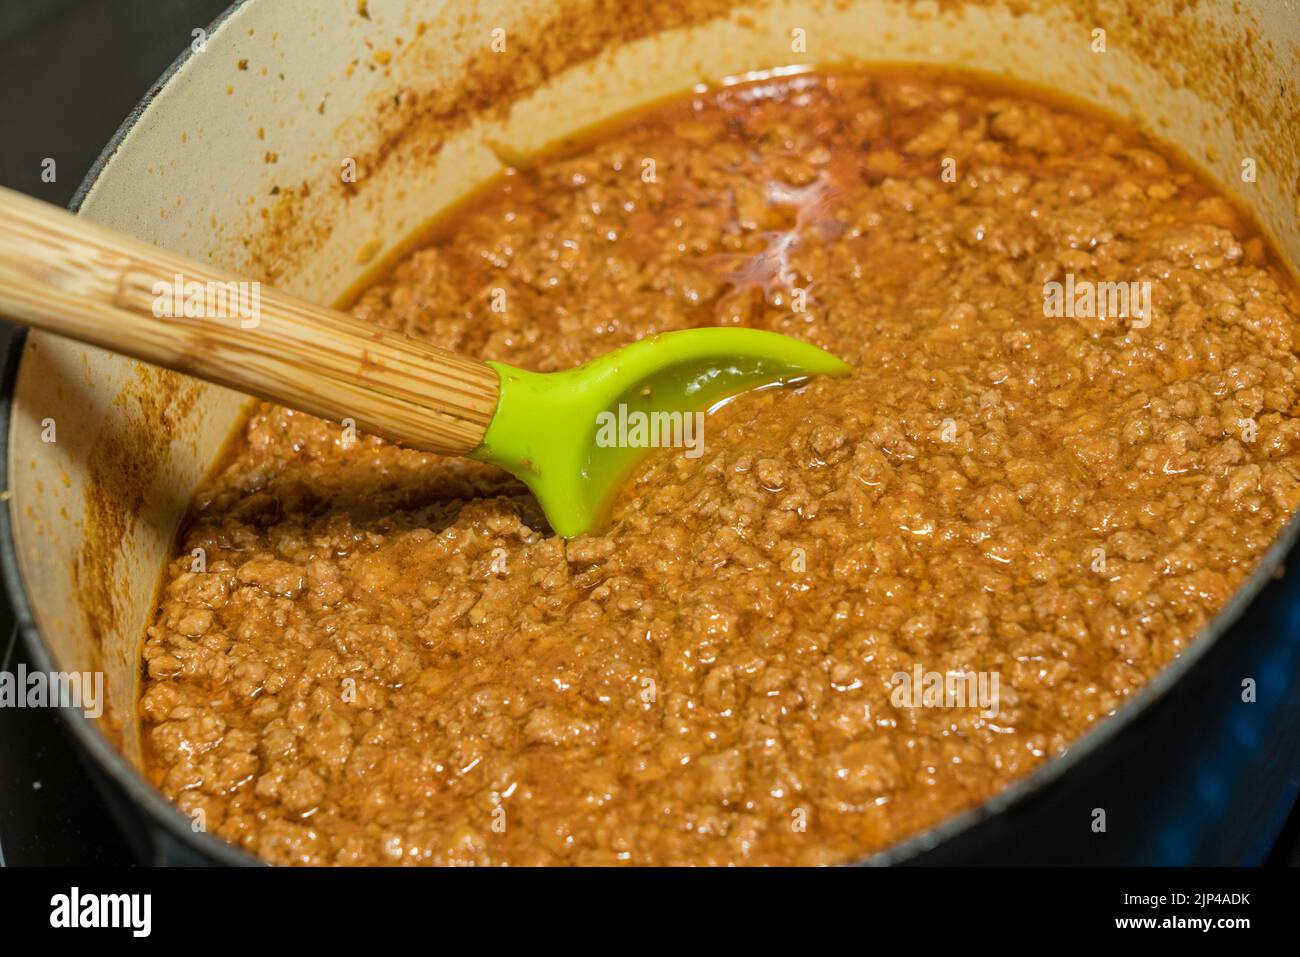 Spoon in simmering pot of home made ragu or ragout in cast iron pot on stove Stock Photo